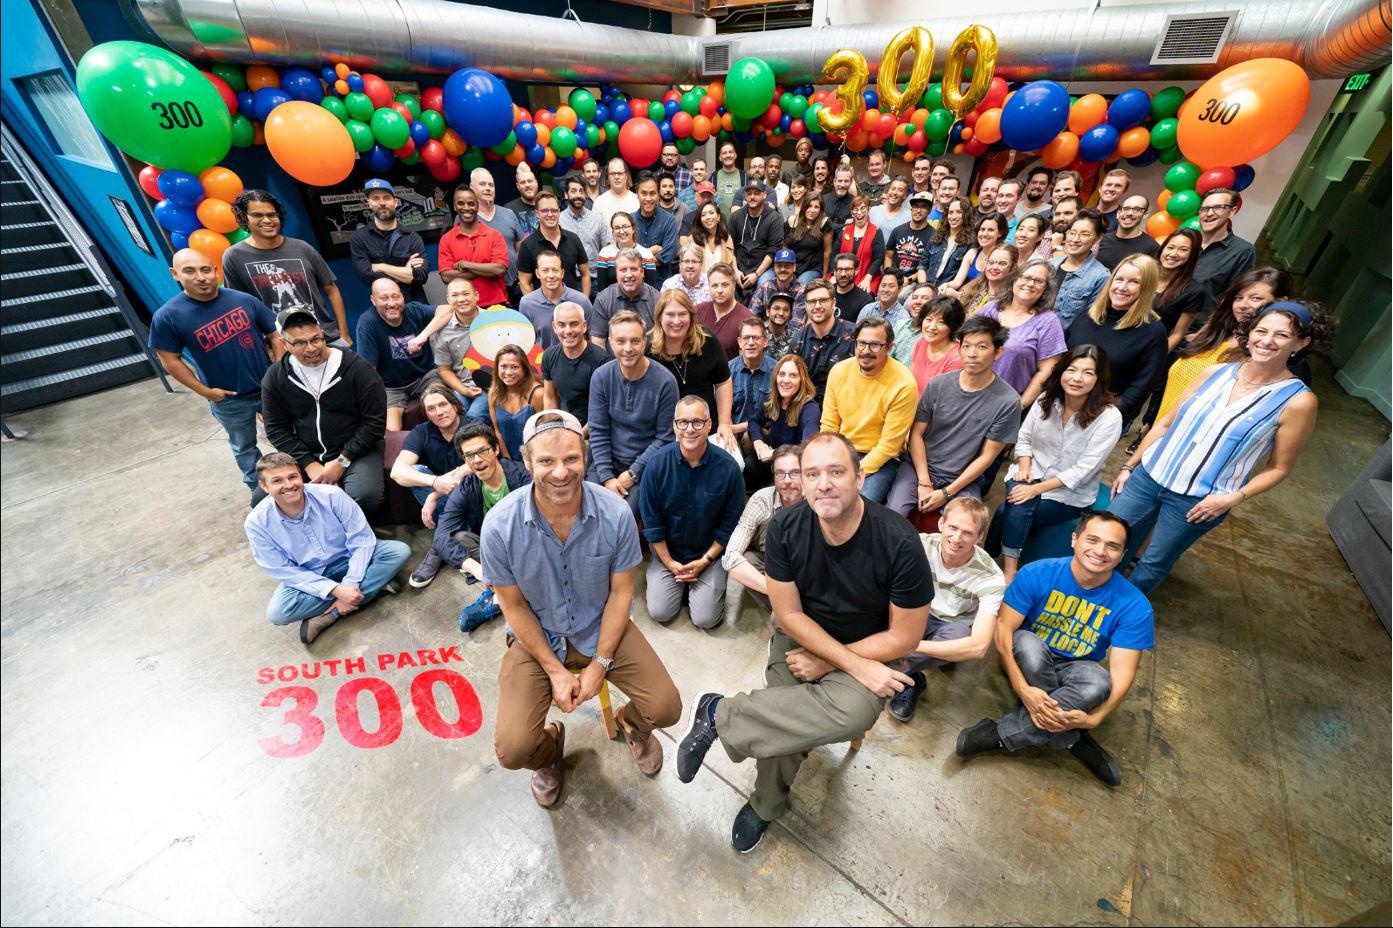 Congratulations to Trey Parker, Matt Stone and the entire crew on their 300th episode